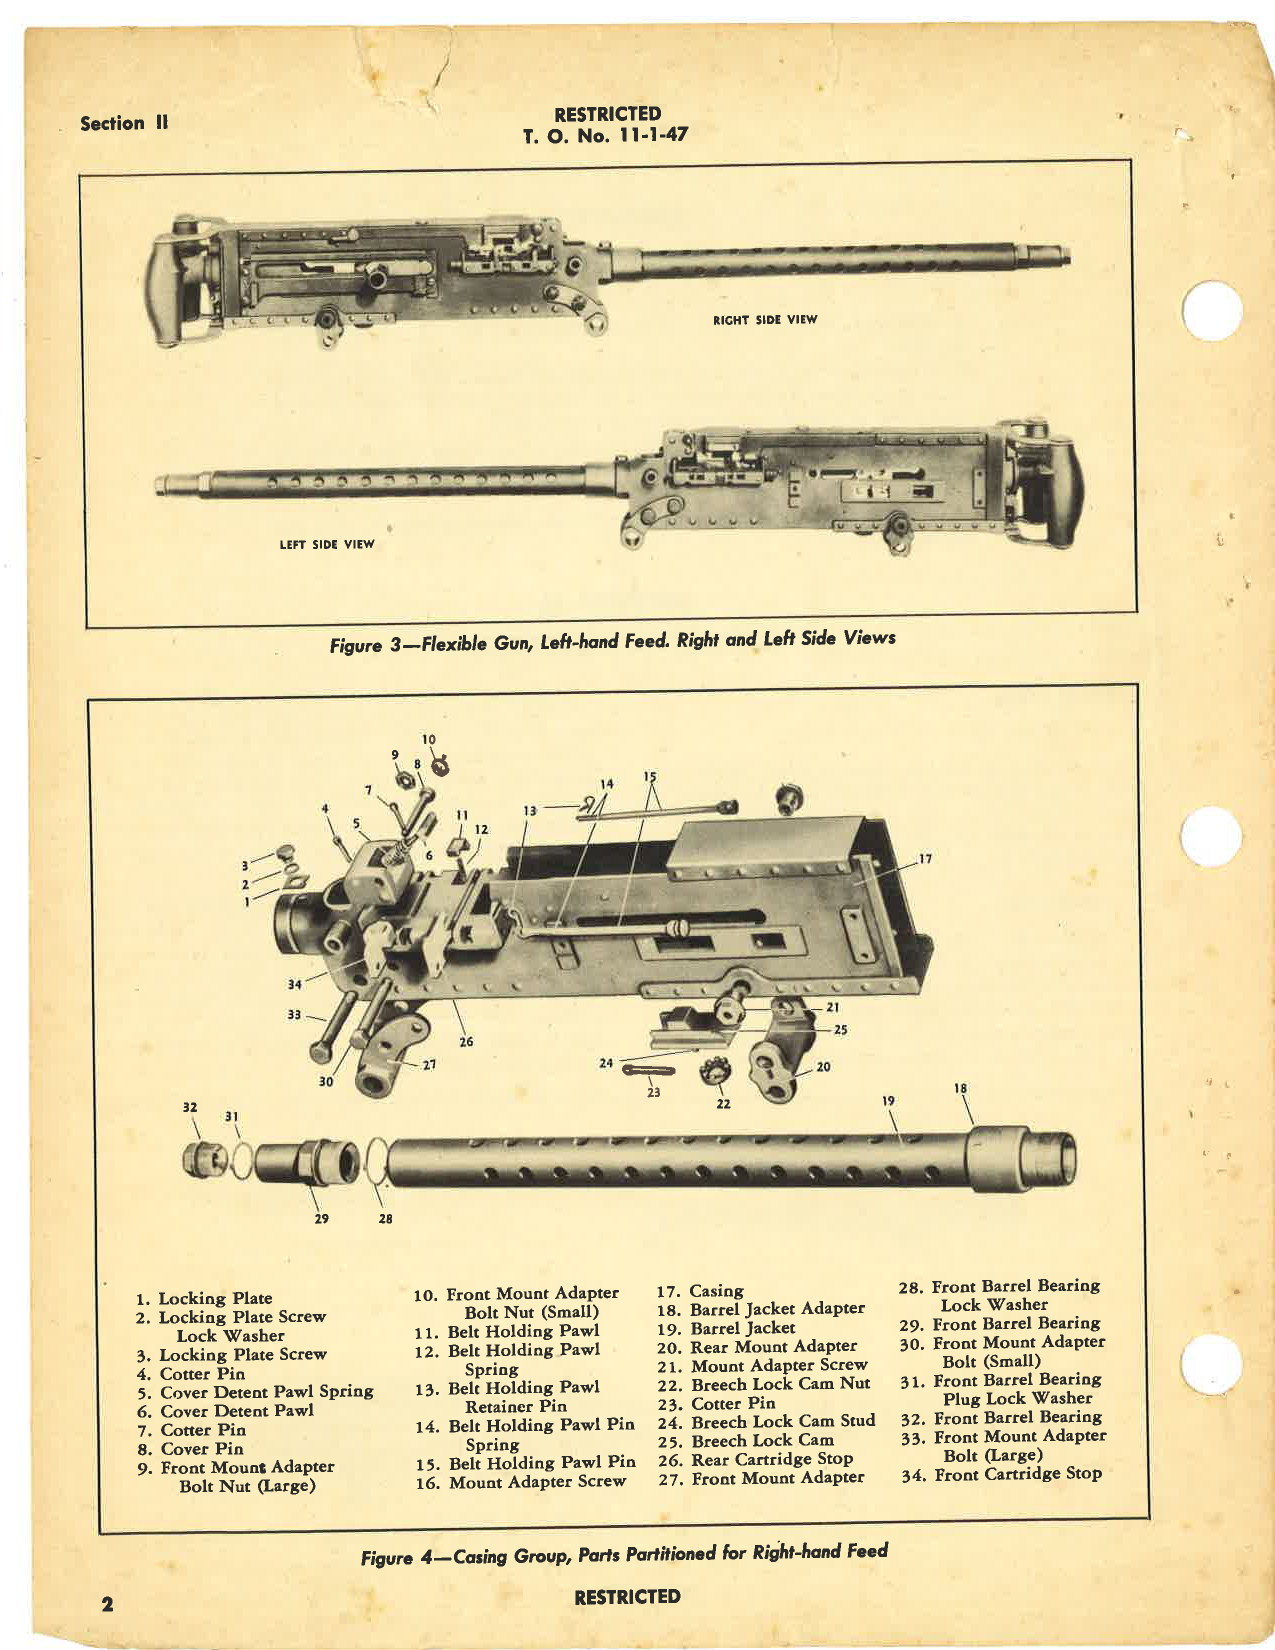 Sample page 6 from AirCorps Library document: Handbook of Instructions with Parts Catalog for Machine Gun Caliber .30 M2, Fixed and Flexible